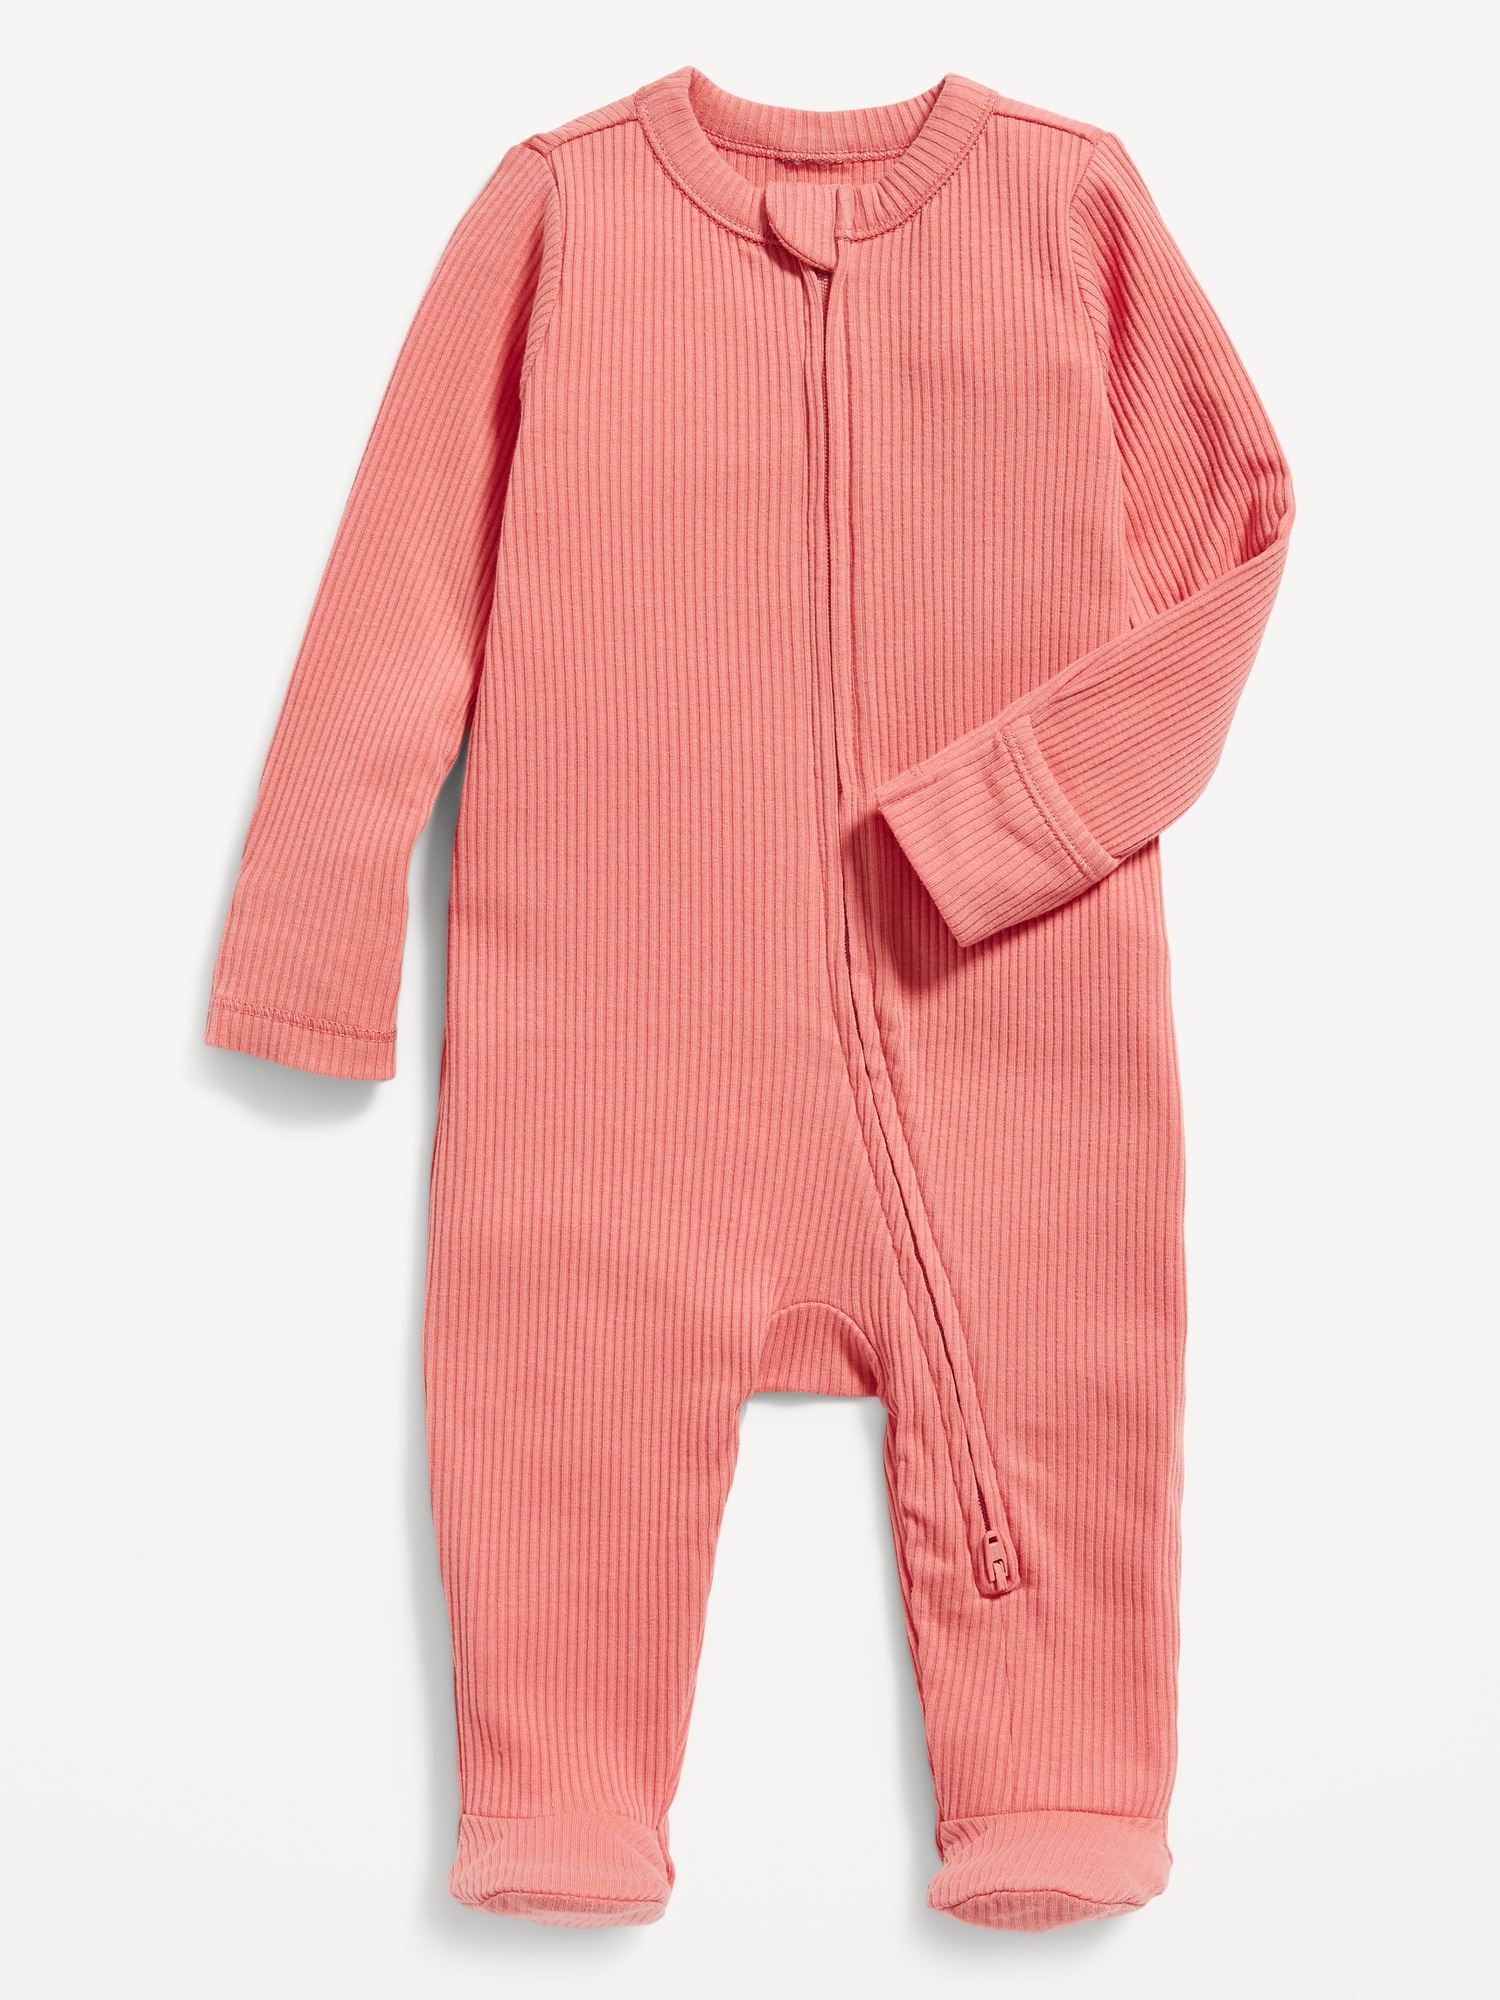 Old Navy Unisex Sleep & Play 2-Way-Zip Footed One-Piece for Baby pink. 1